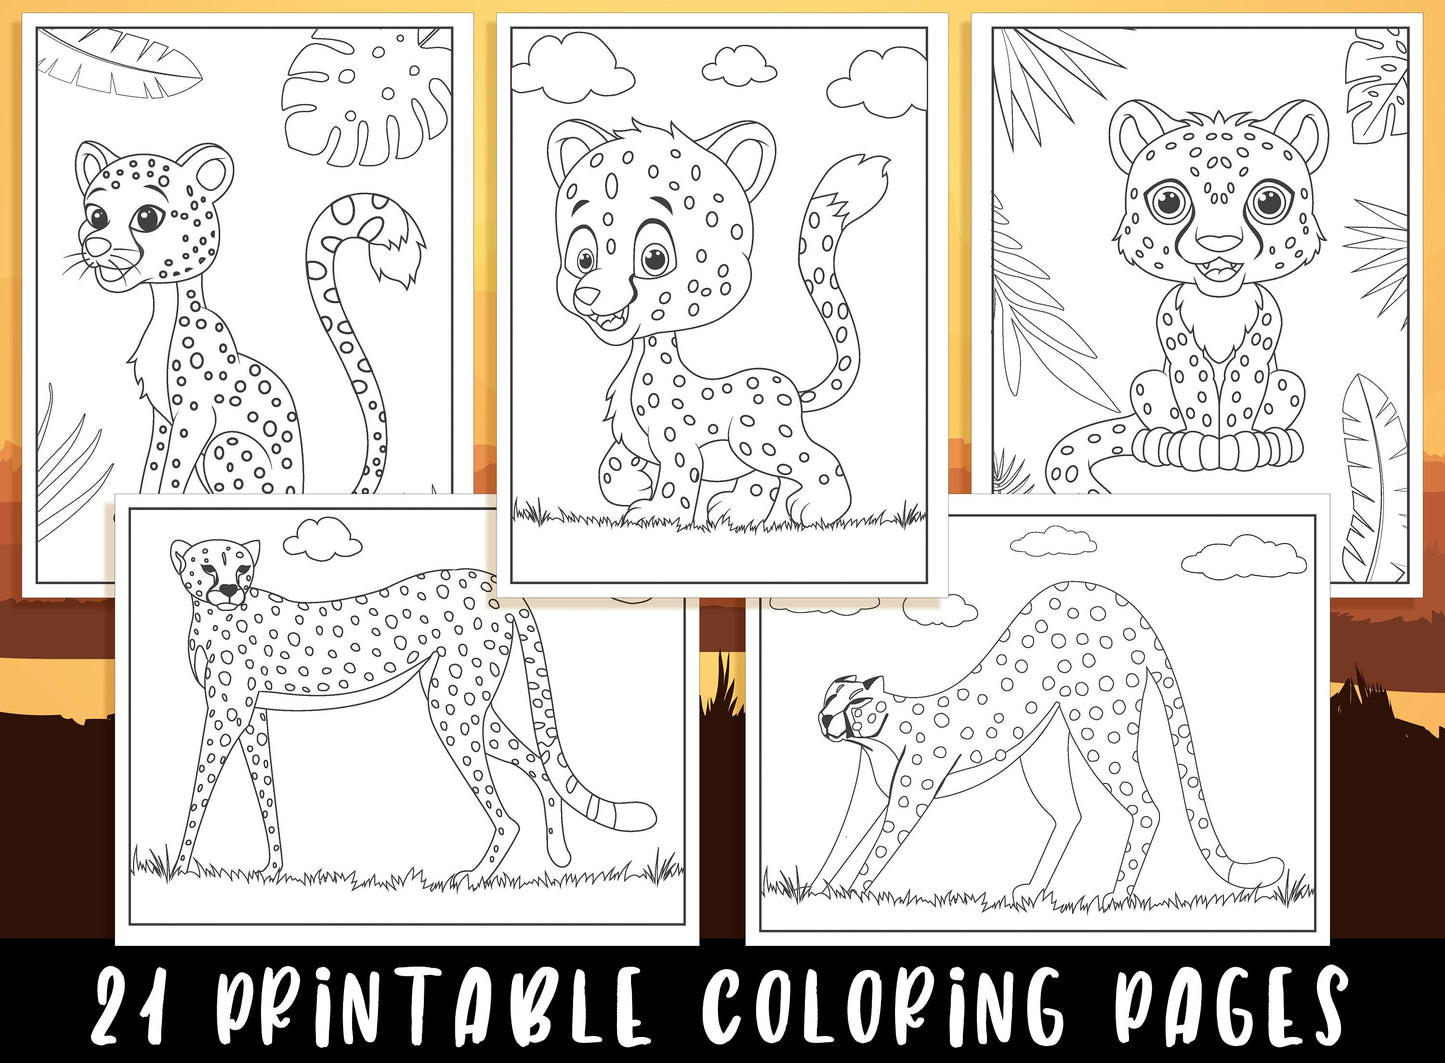 Cheetah Coloring Pages, 21 Printable Cheetah Coloring Pages for Kids, Boys, Girls, Teens, Cheetah Birthday Party Activity, Instant Download.